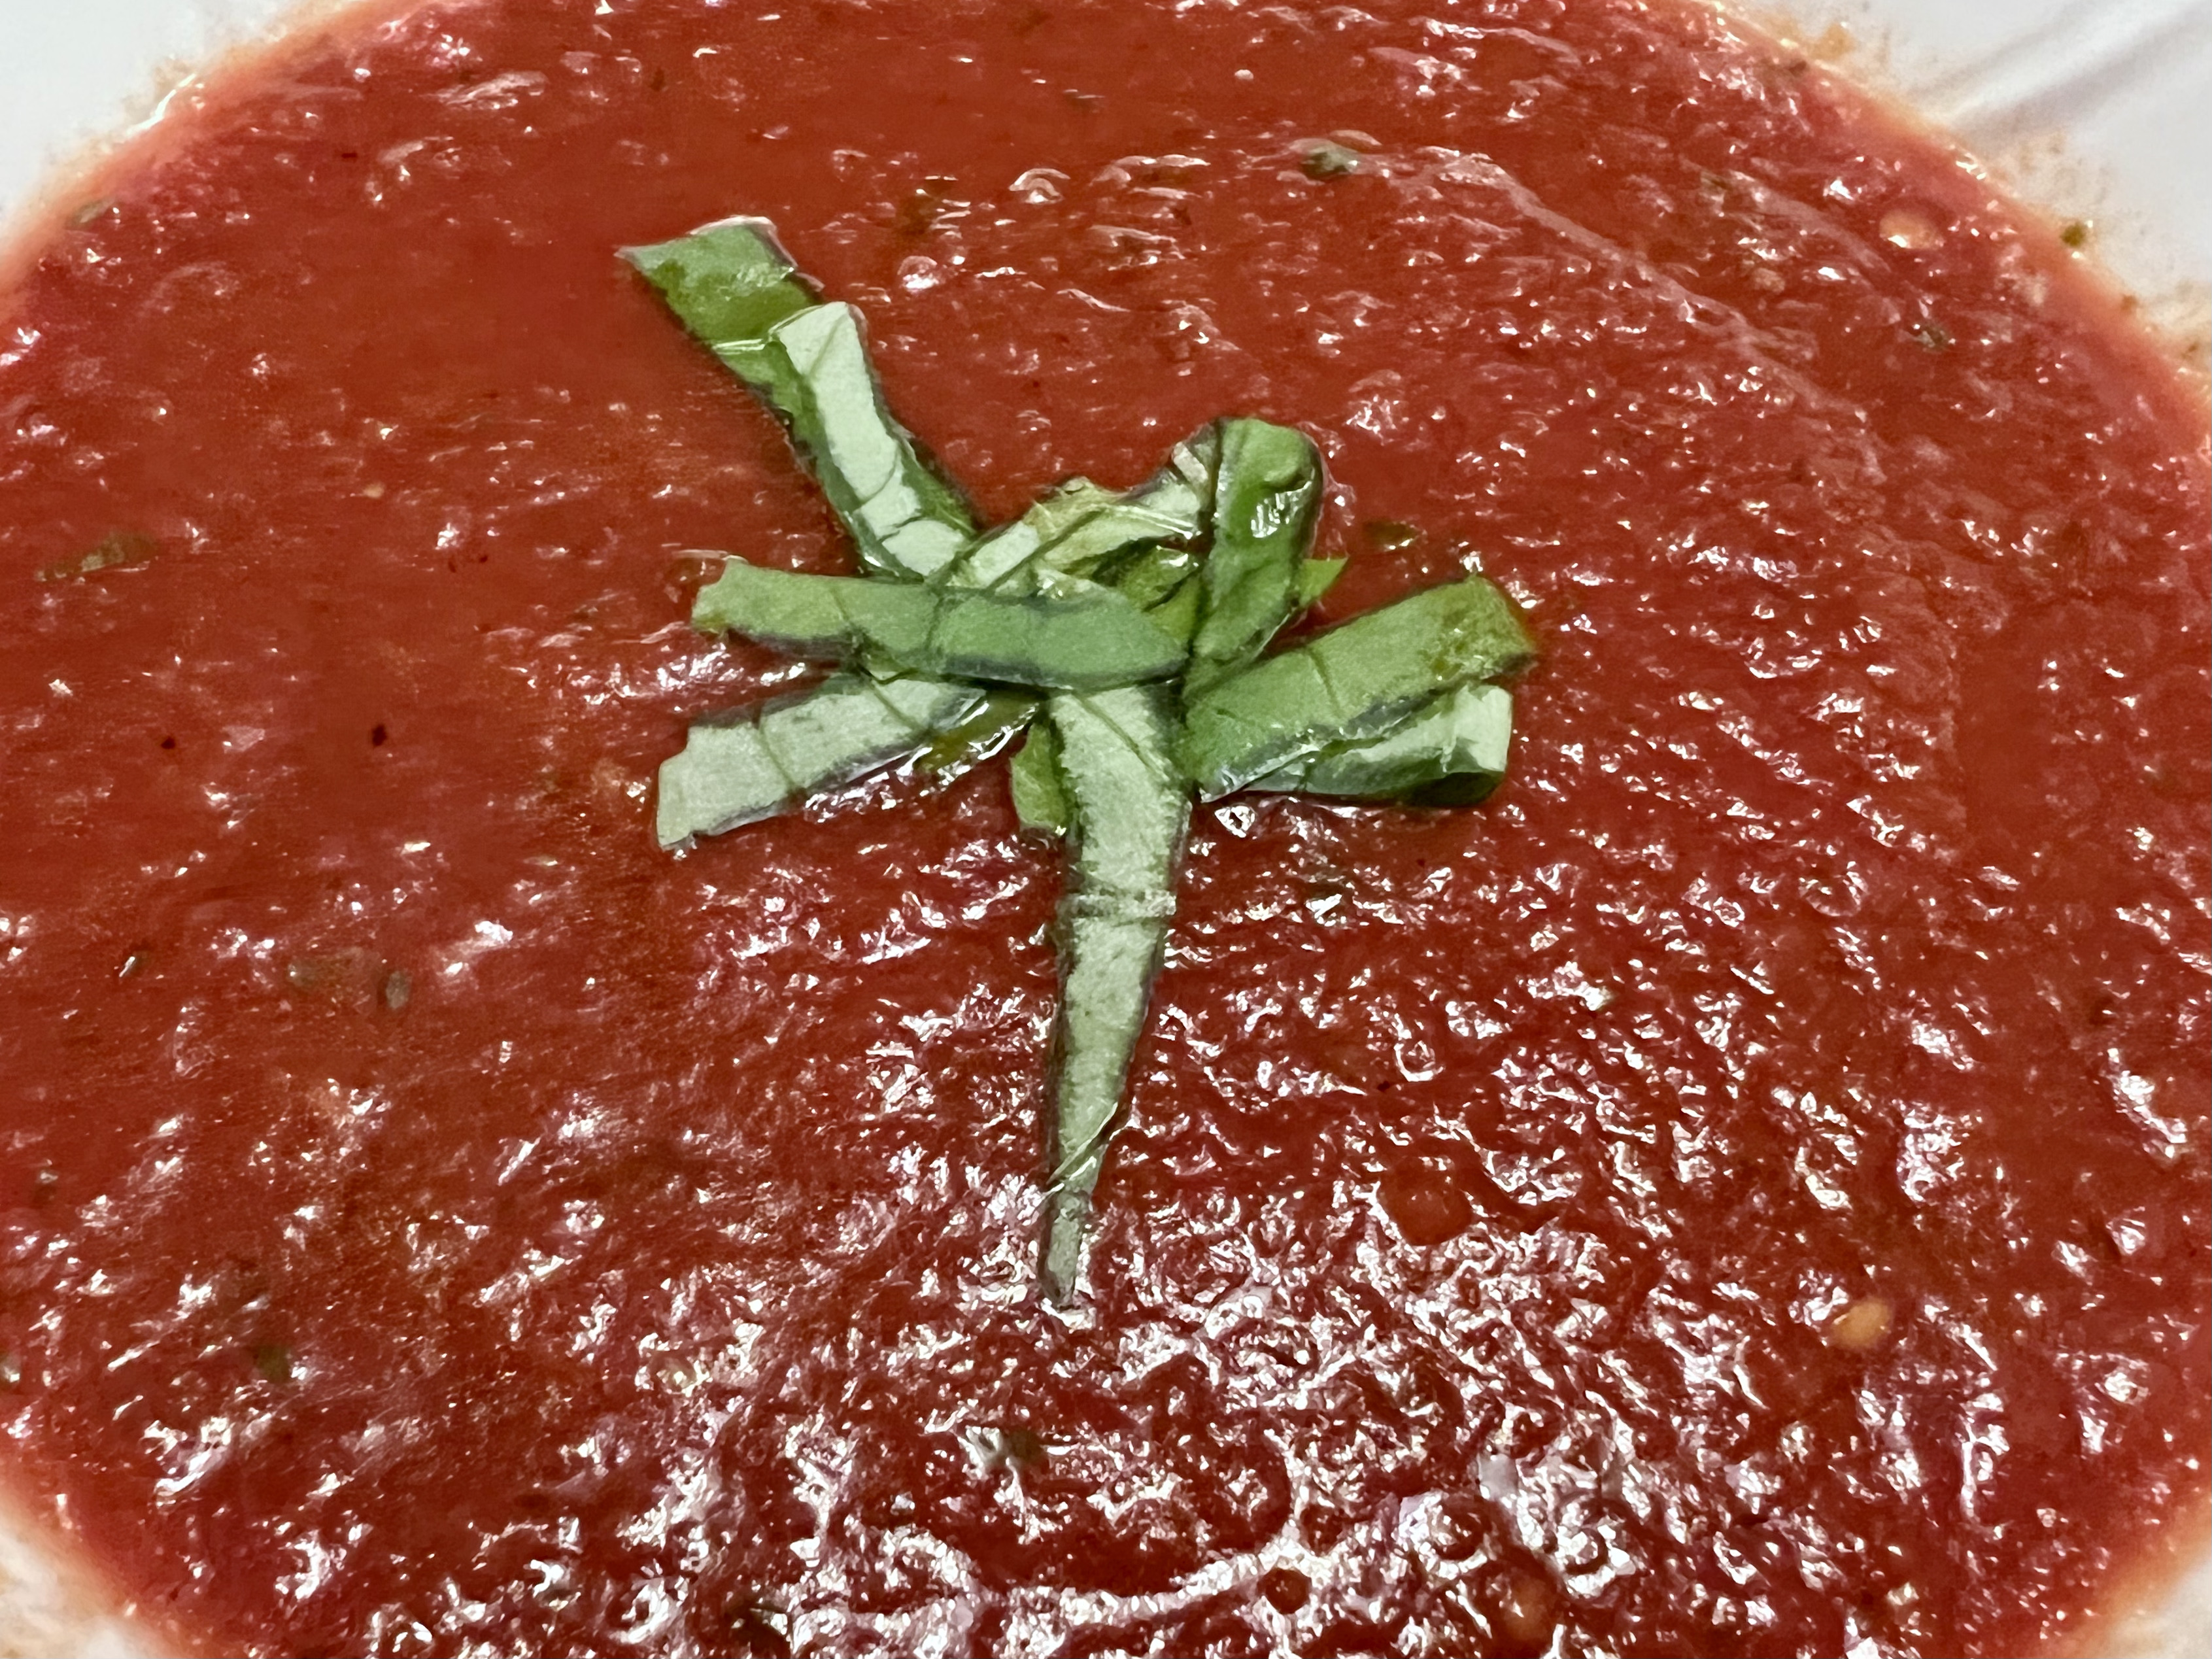 A glistening, deep red tomato soup with flecks of basil within, topped with strips of fresh basil.